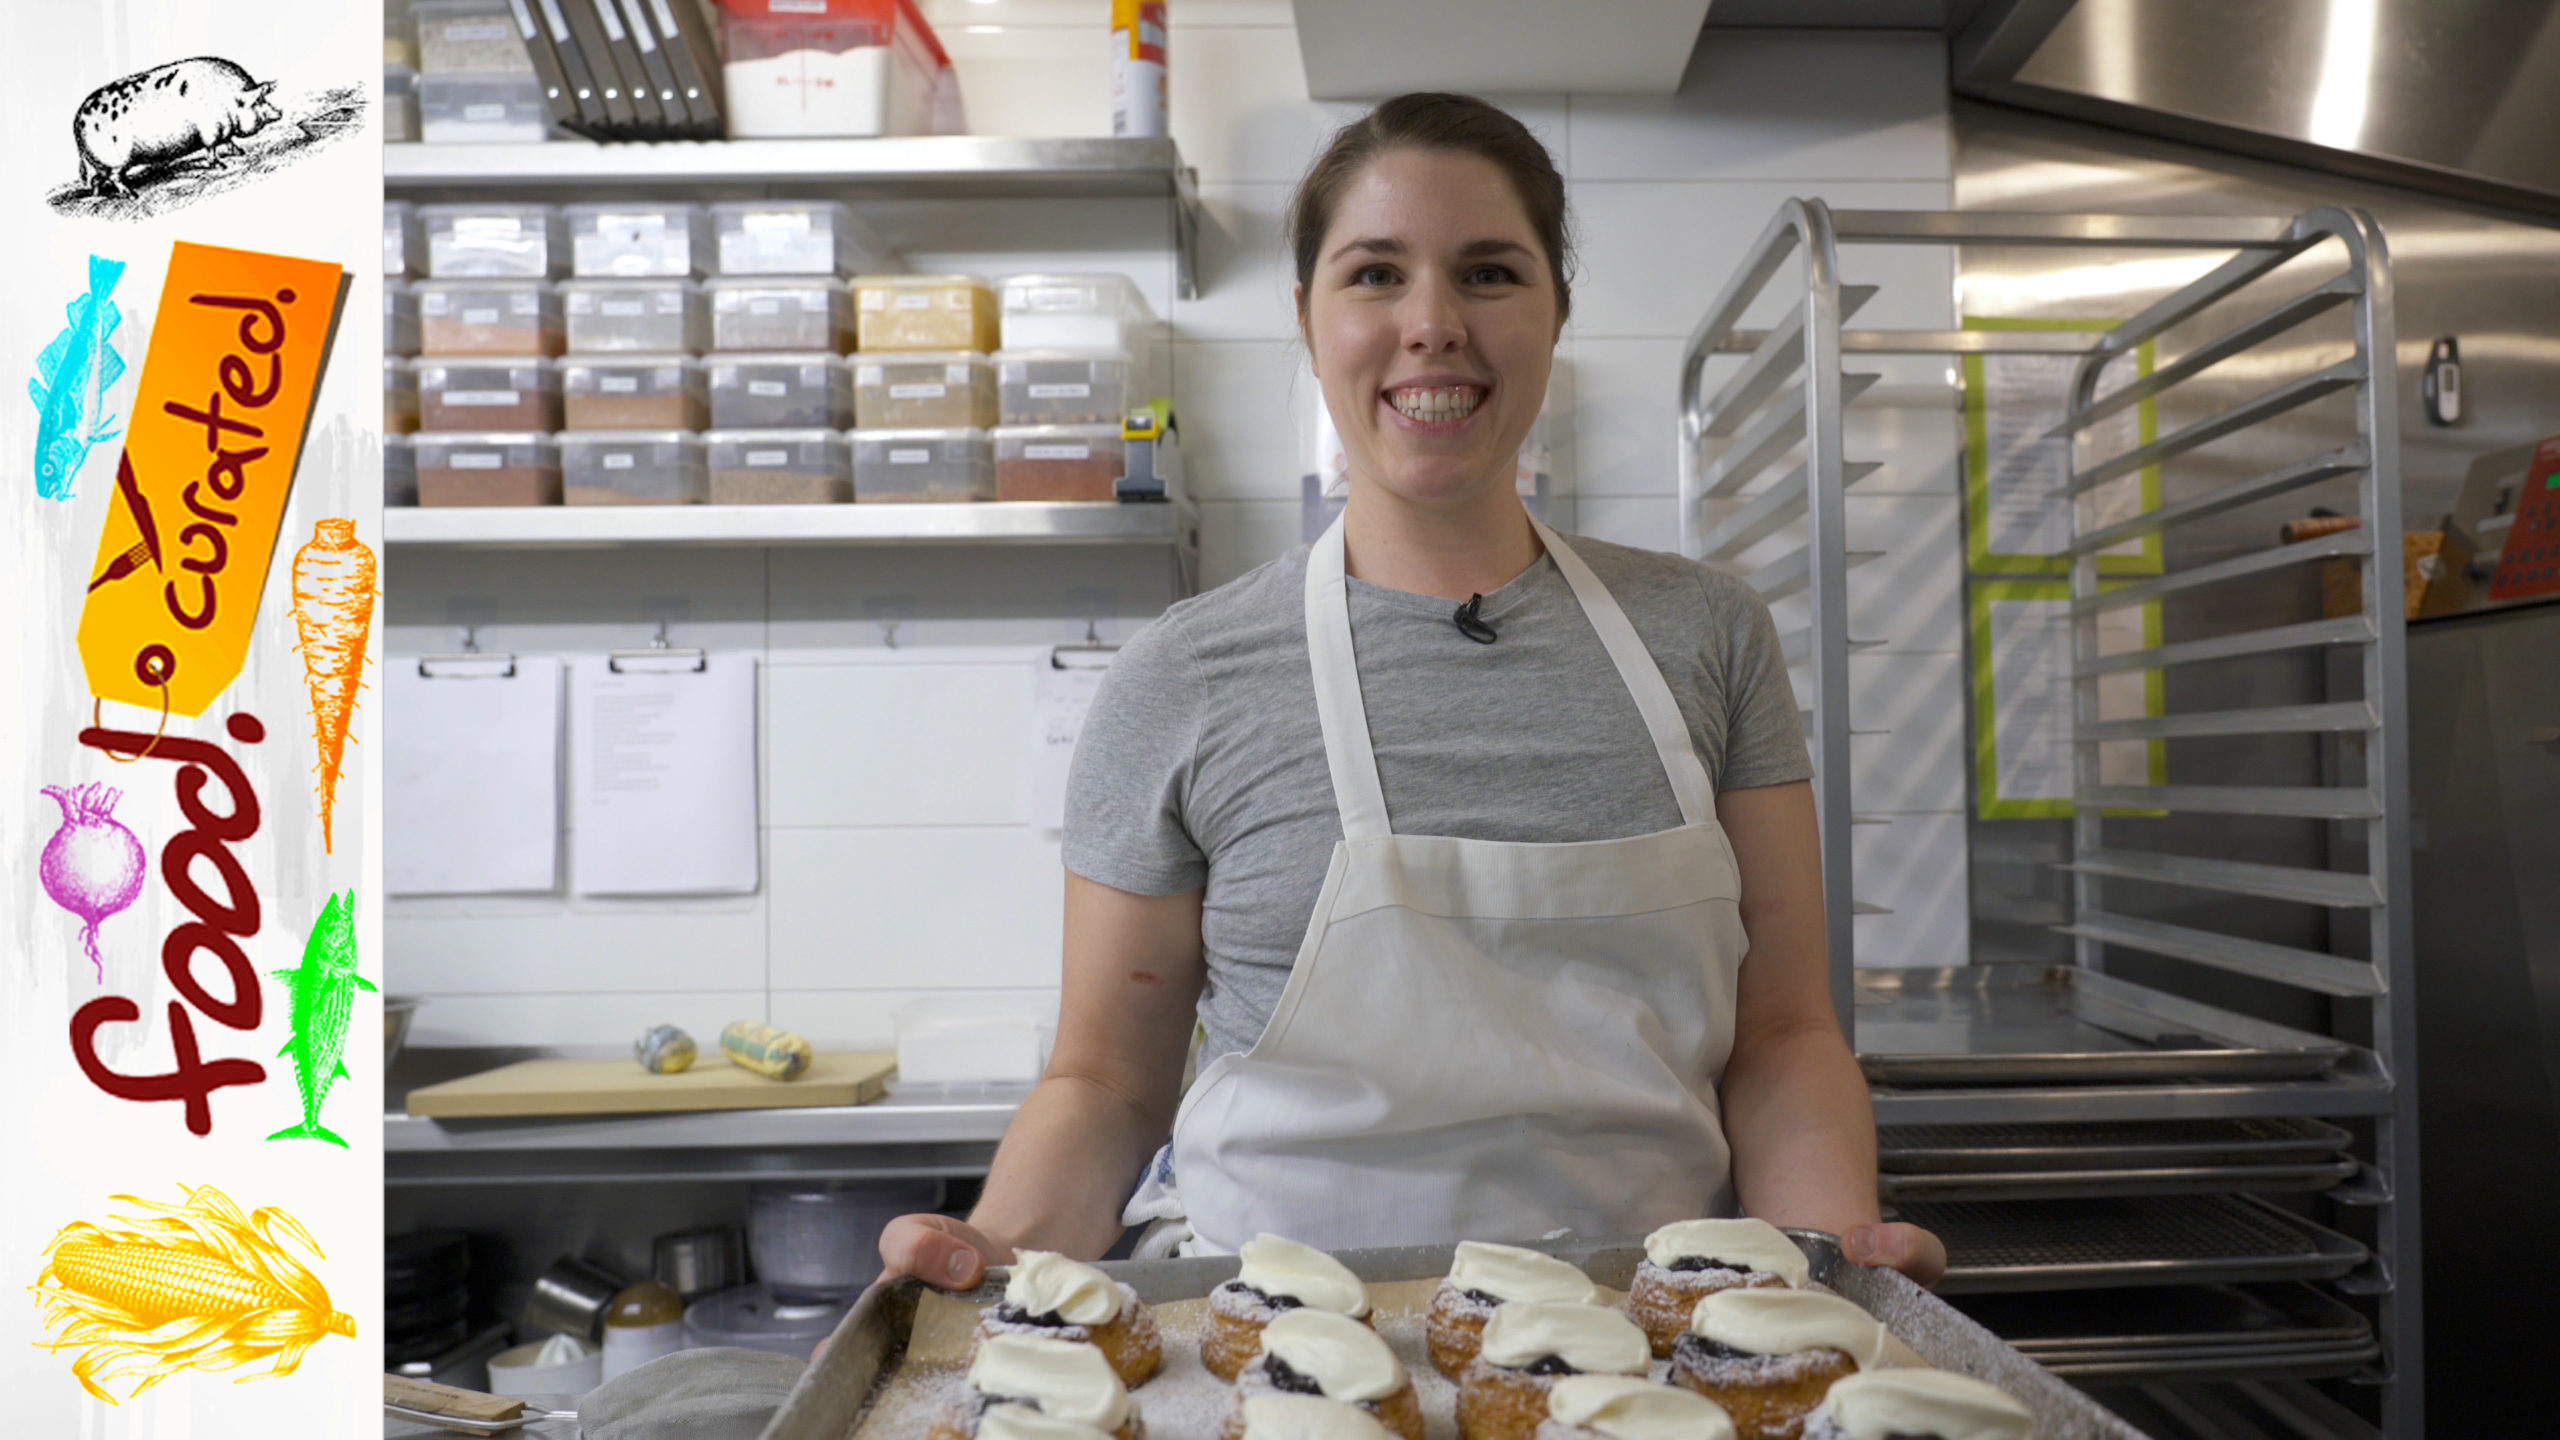 The Morning Bake Chef Kelly Mencins Pastry and Sourdough Bread Program Shines at Rolos